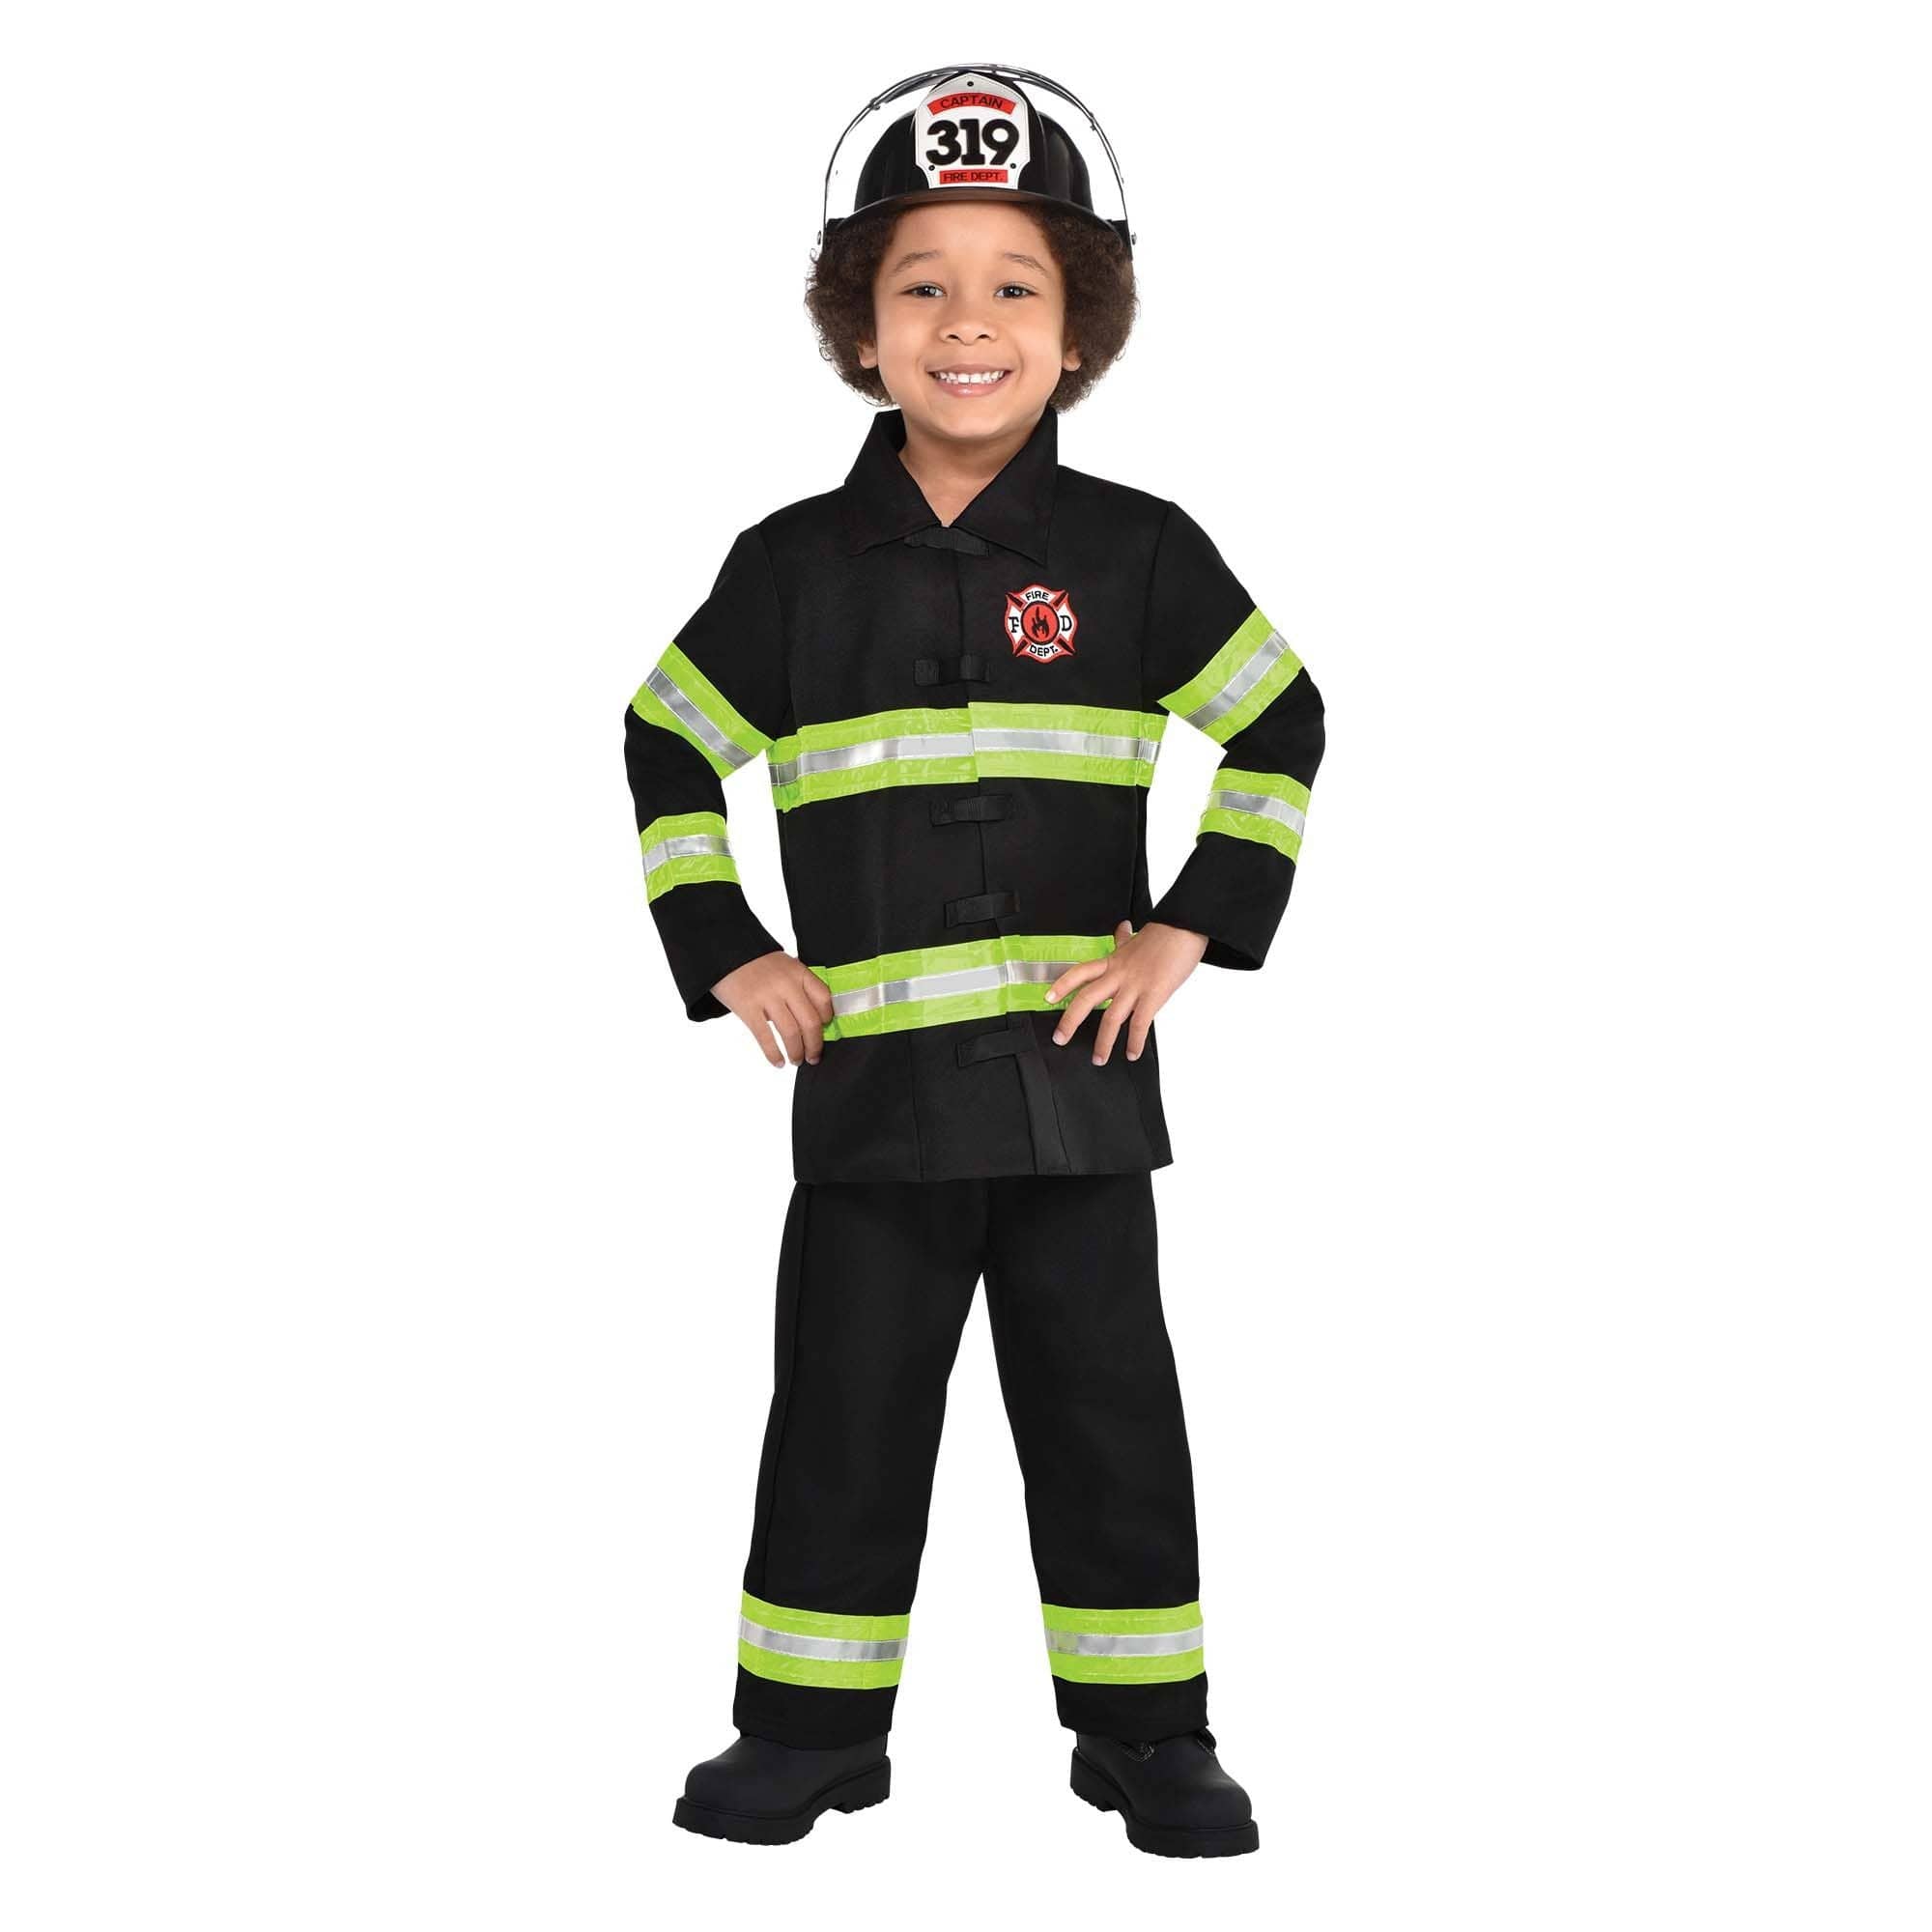 Amscan COSTUMES Small (4-6) Childs Firefighter Costume